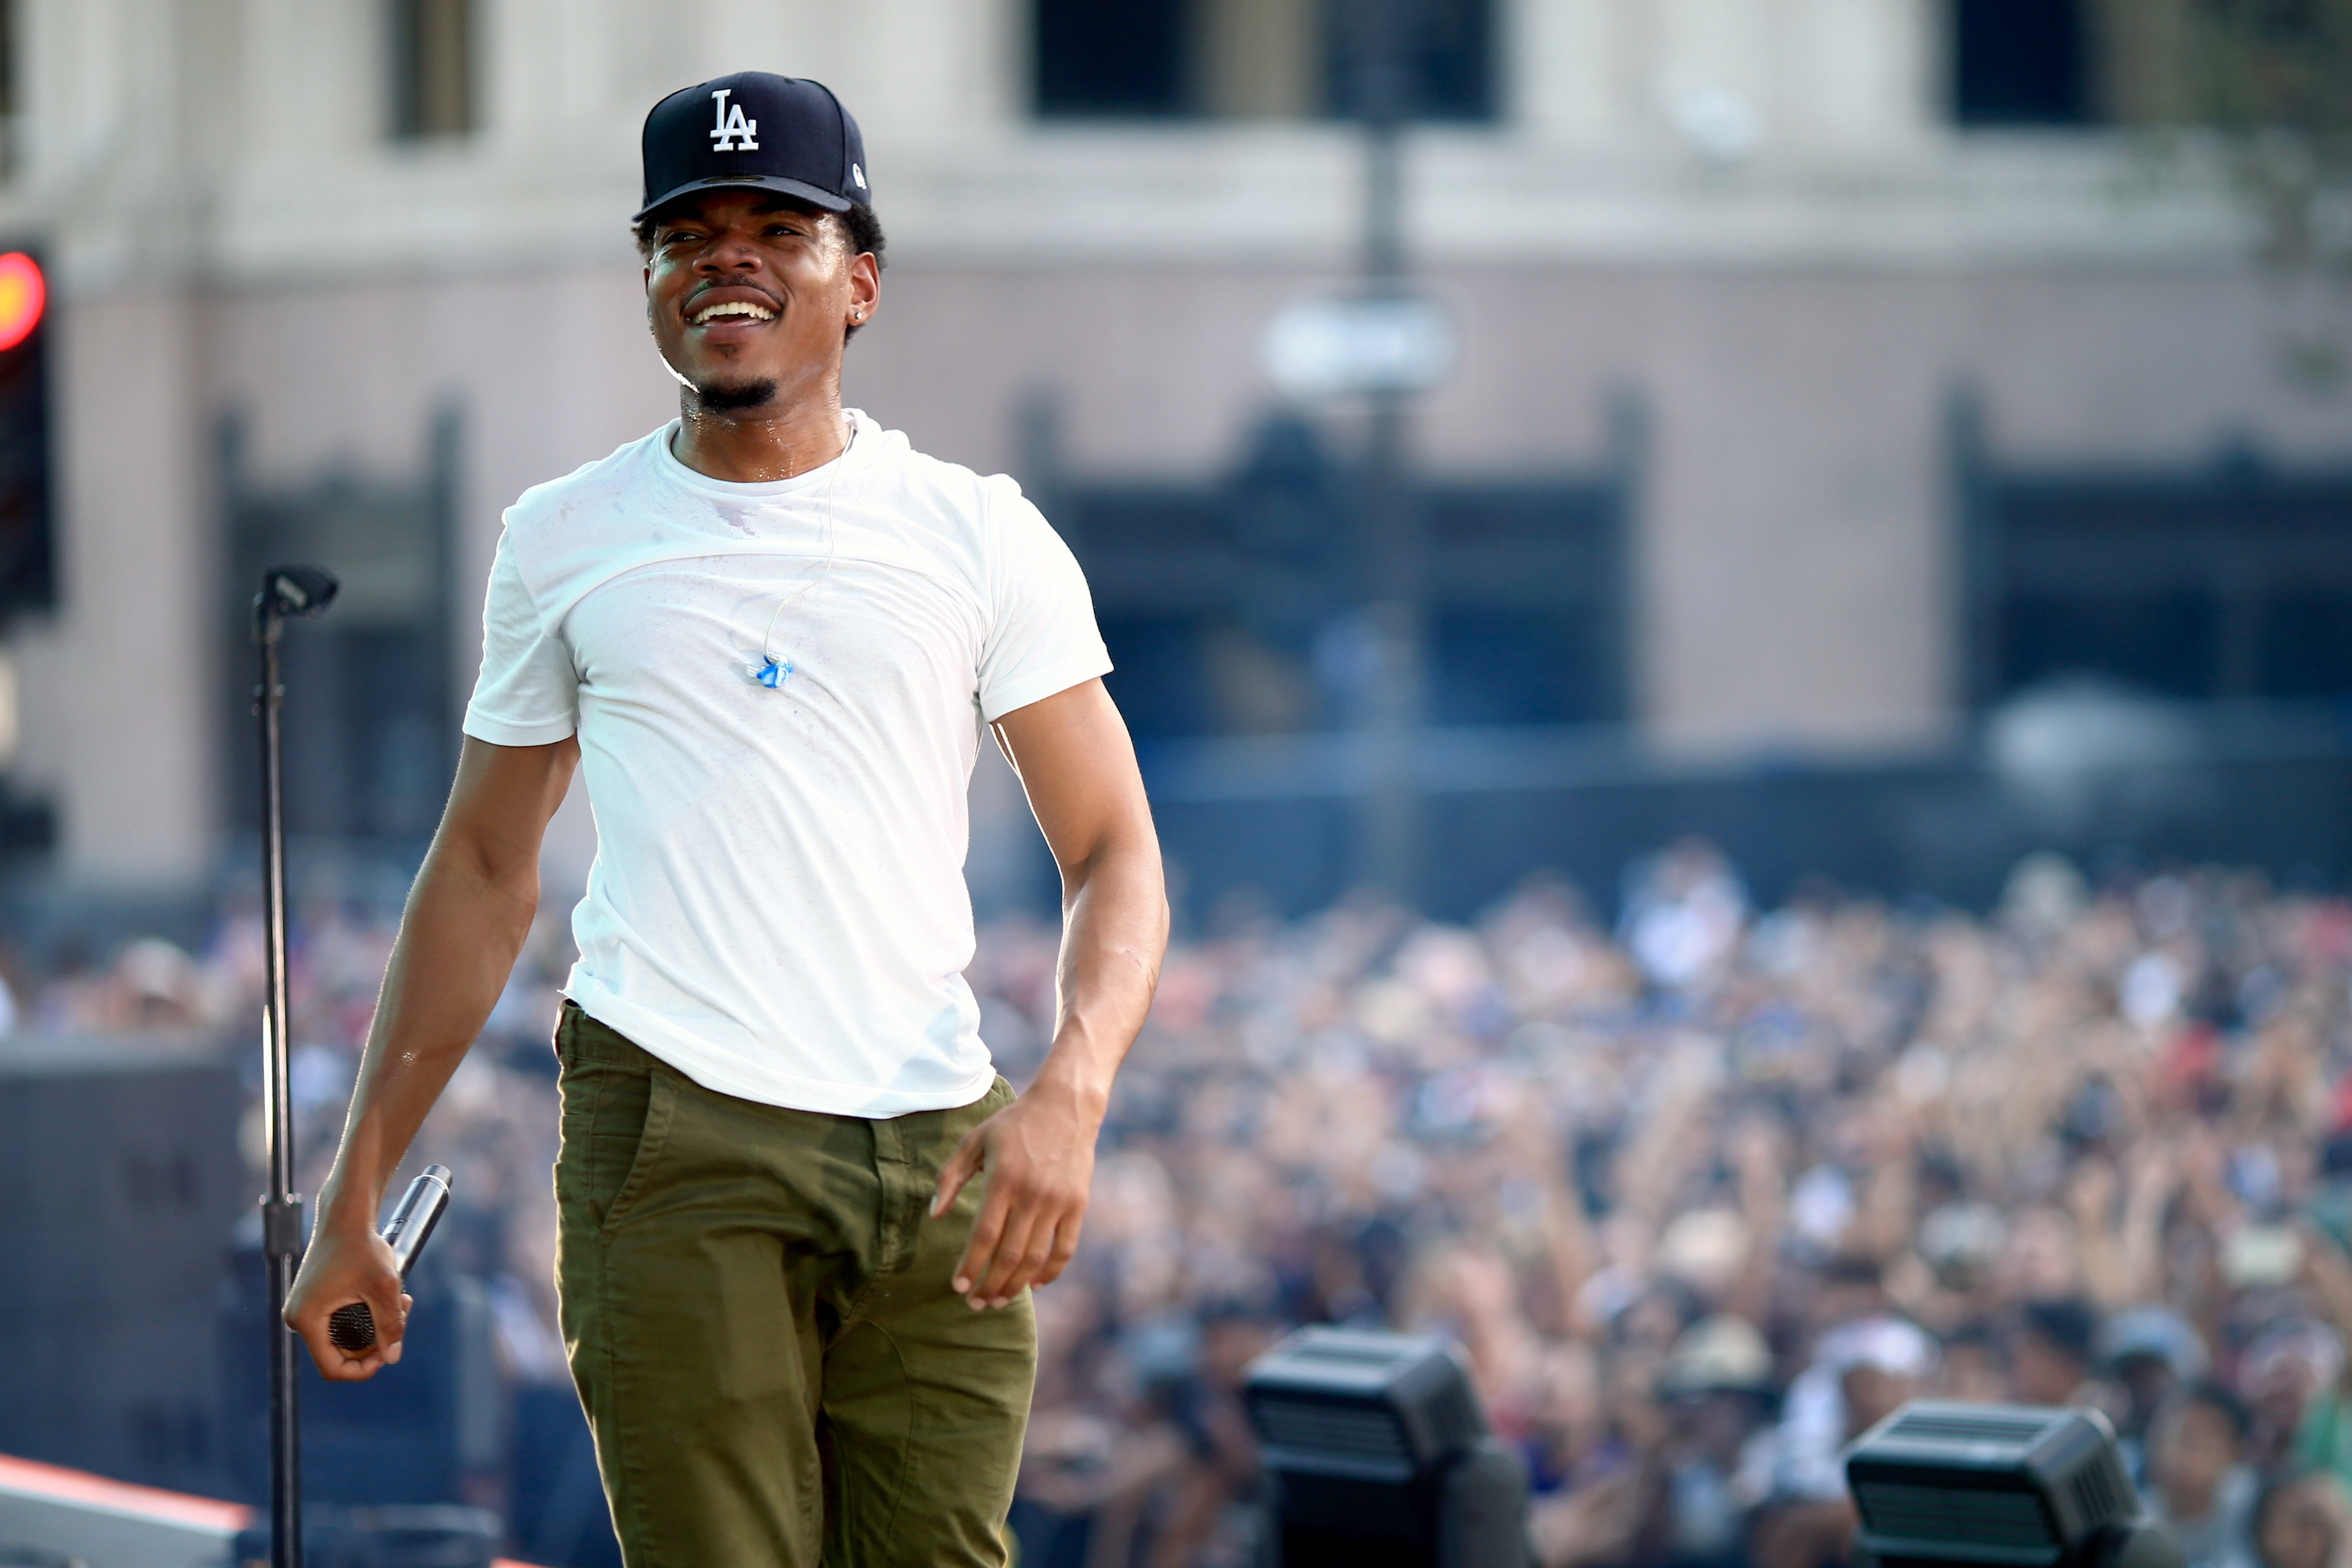 Music Chance The Rapper HD Wallpaper | Background Image